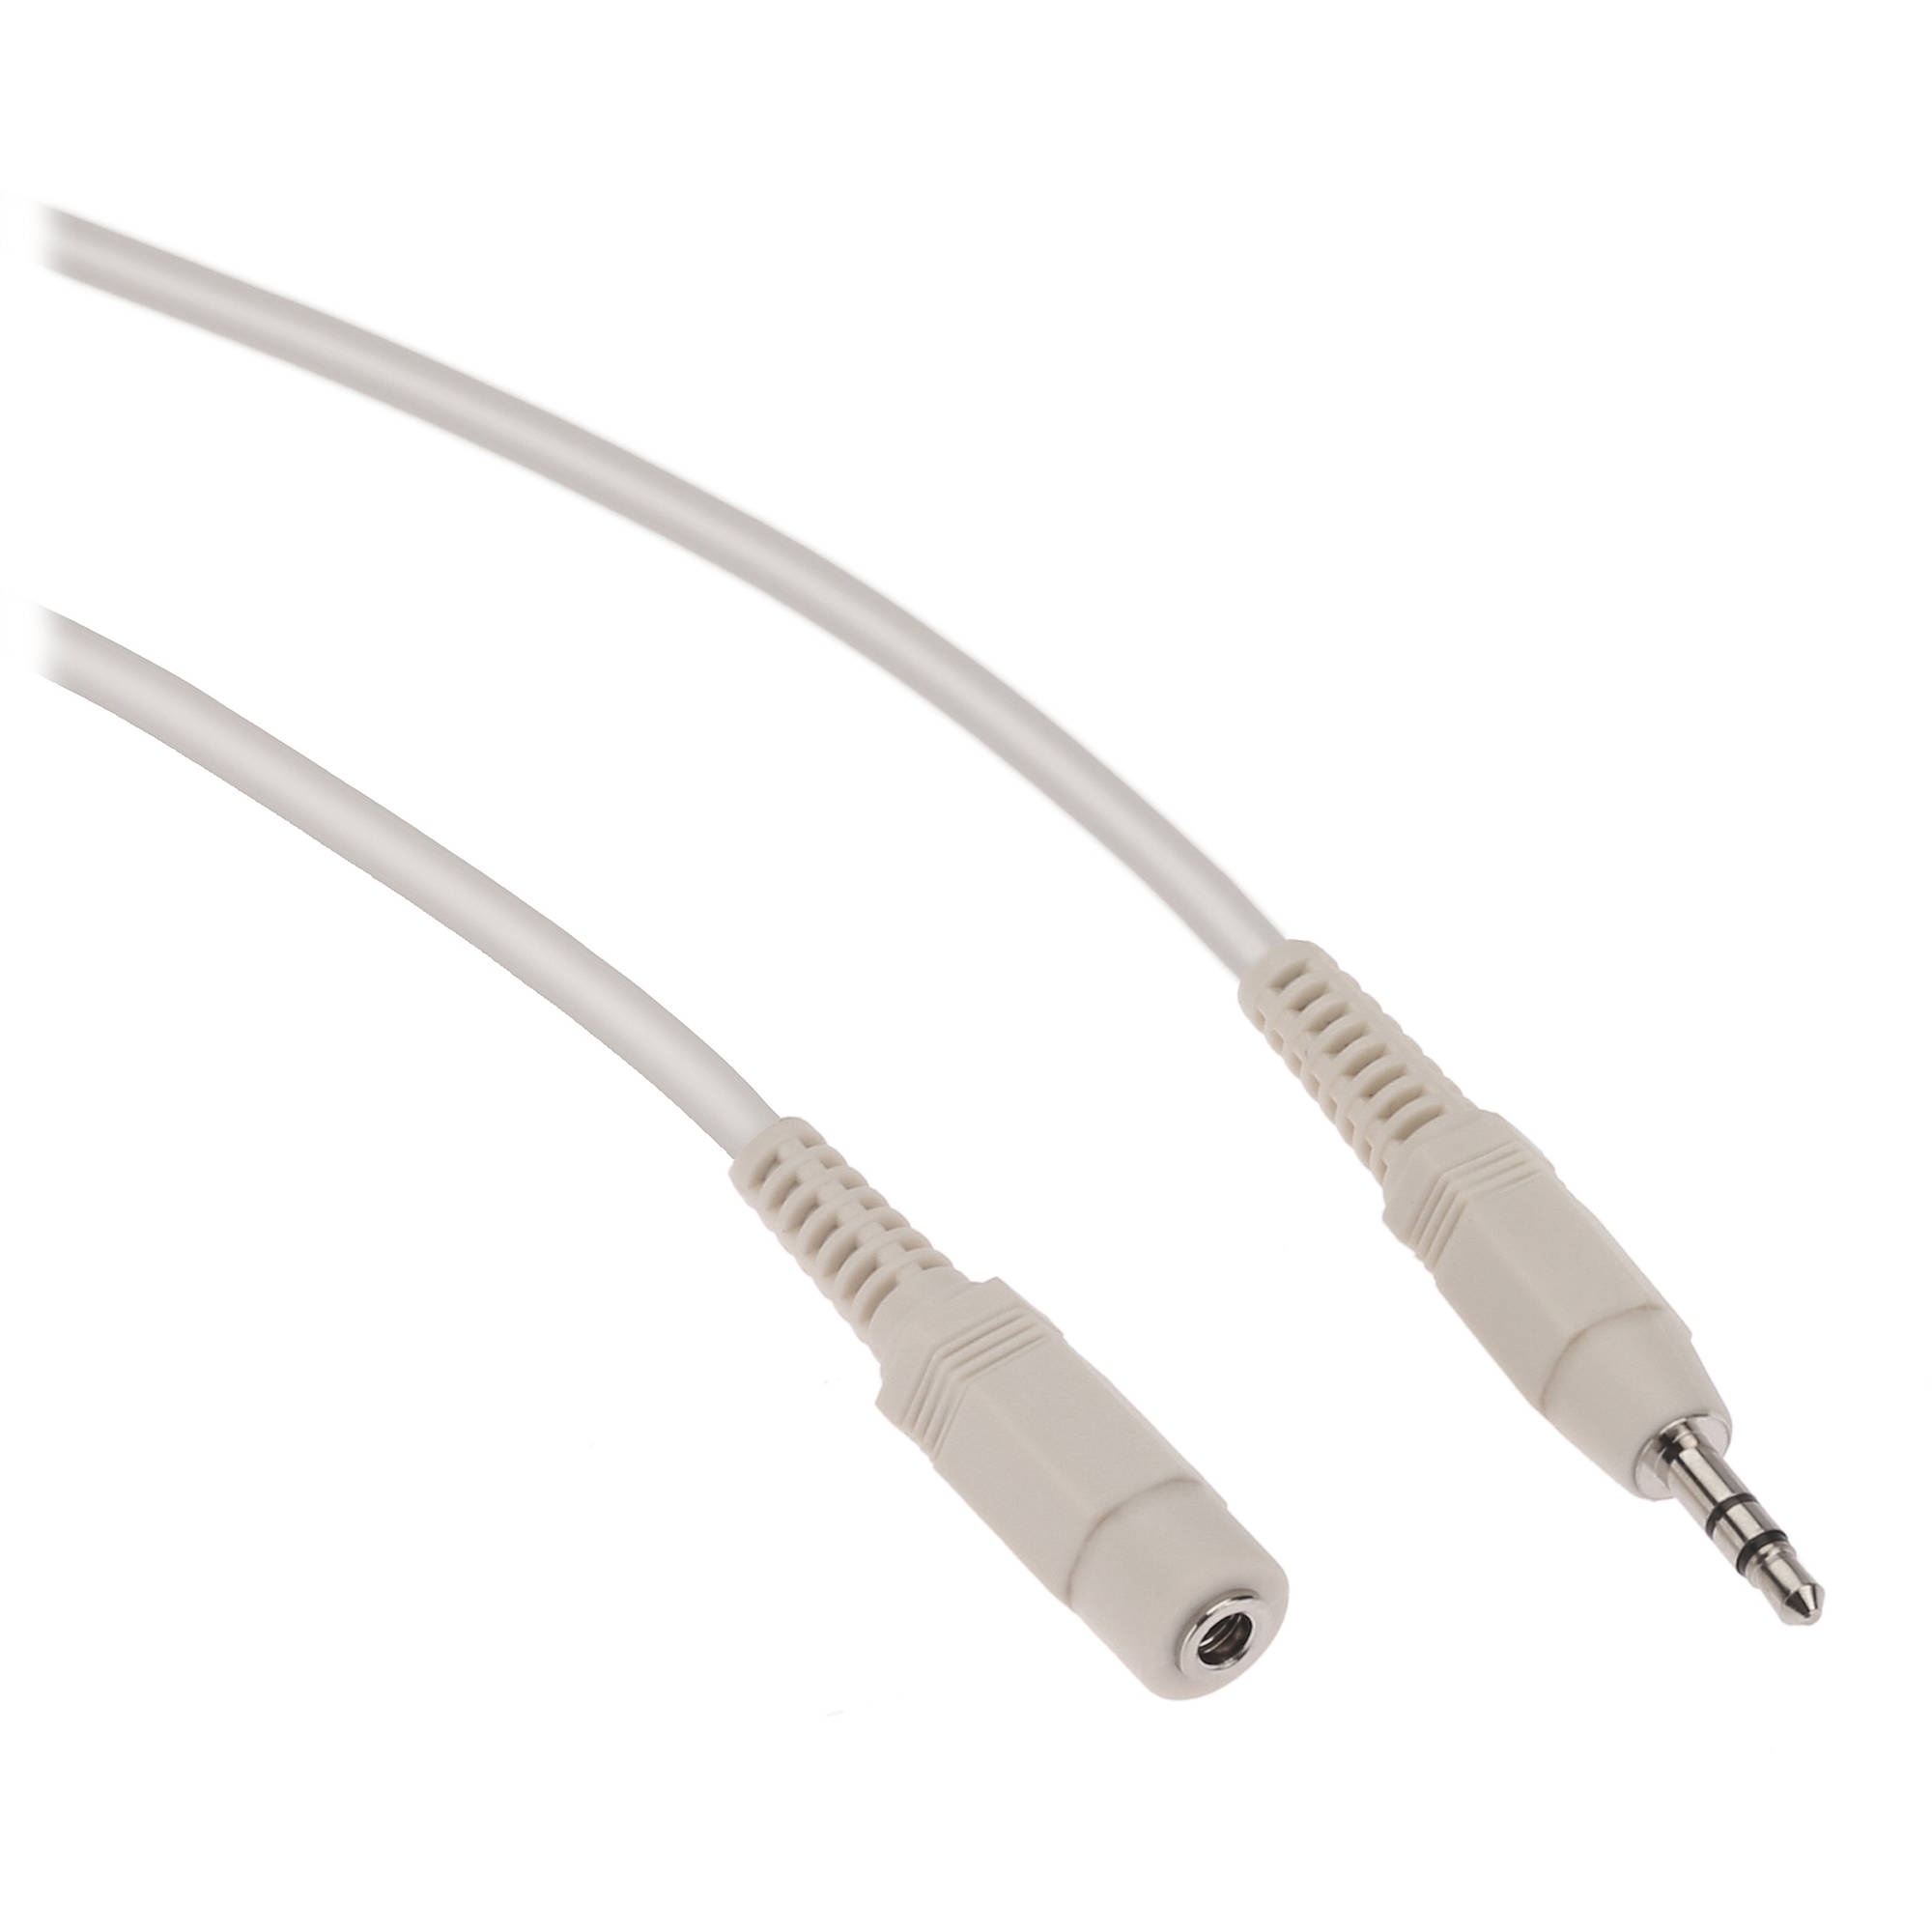 Pearstone Stereo Mini Male to Stereo Mini Female Extension Cable (White) - 10'